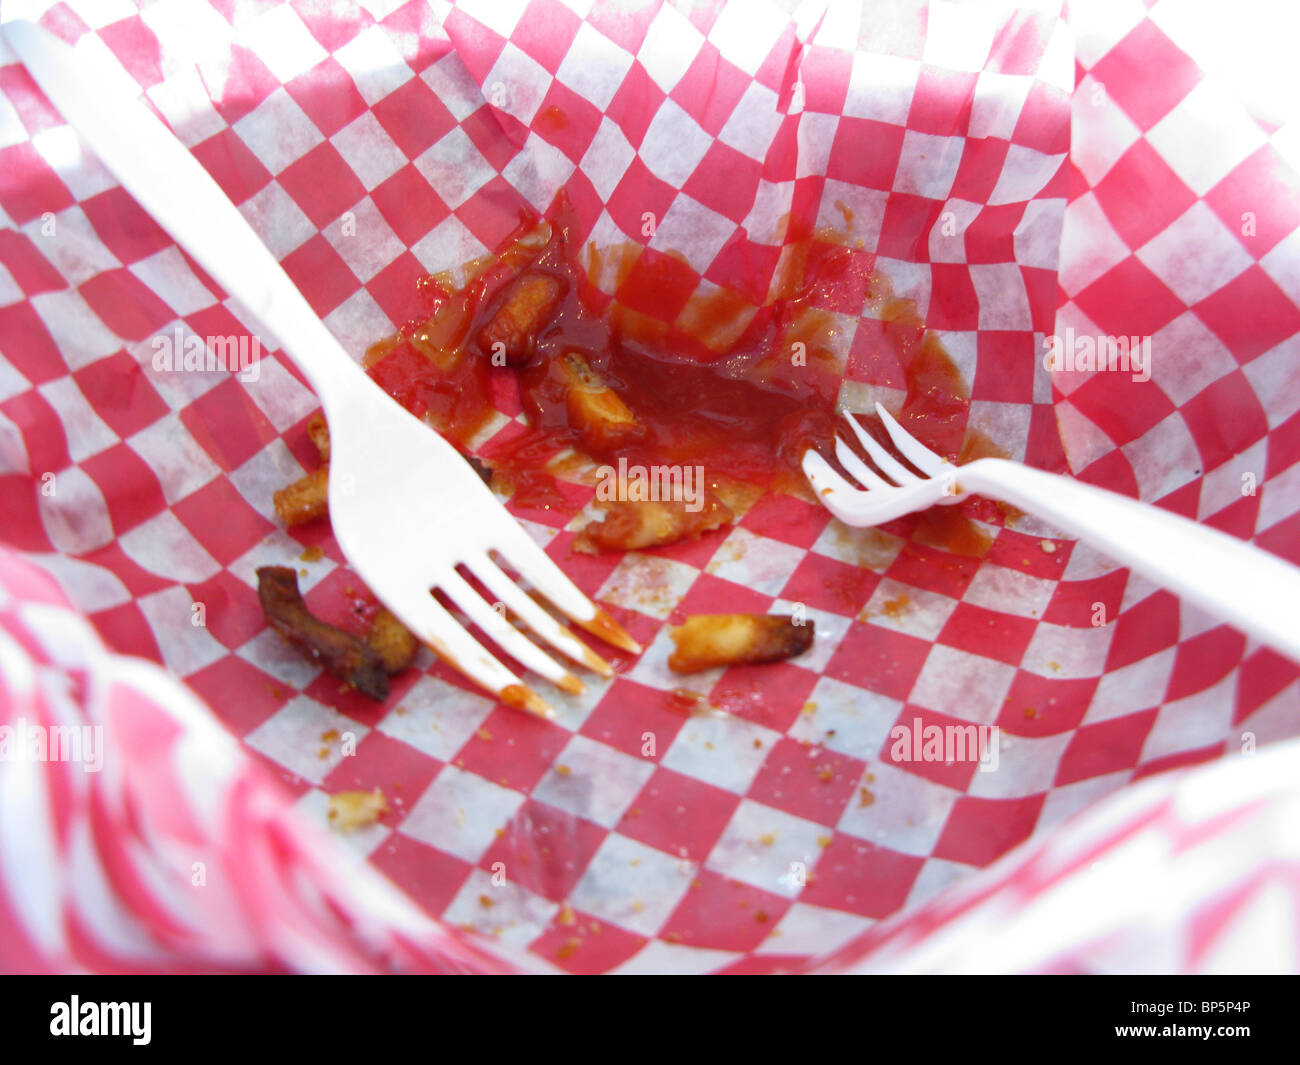 Two white plastic forks in a red and white checkered basket with the eaten remains of french fries and ketchup. Stock Photo